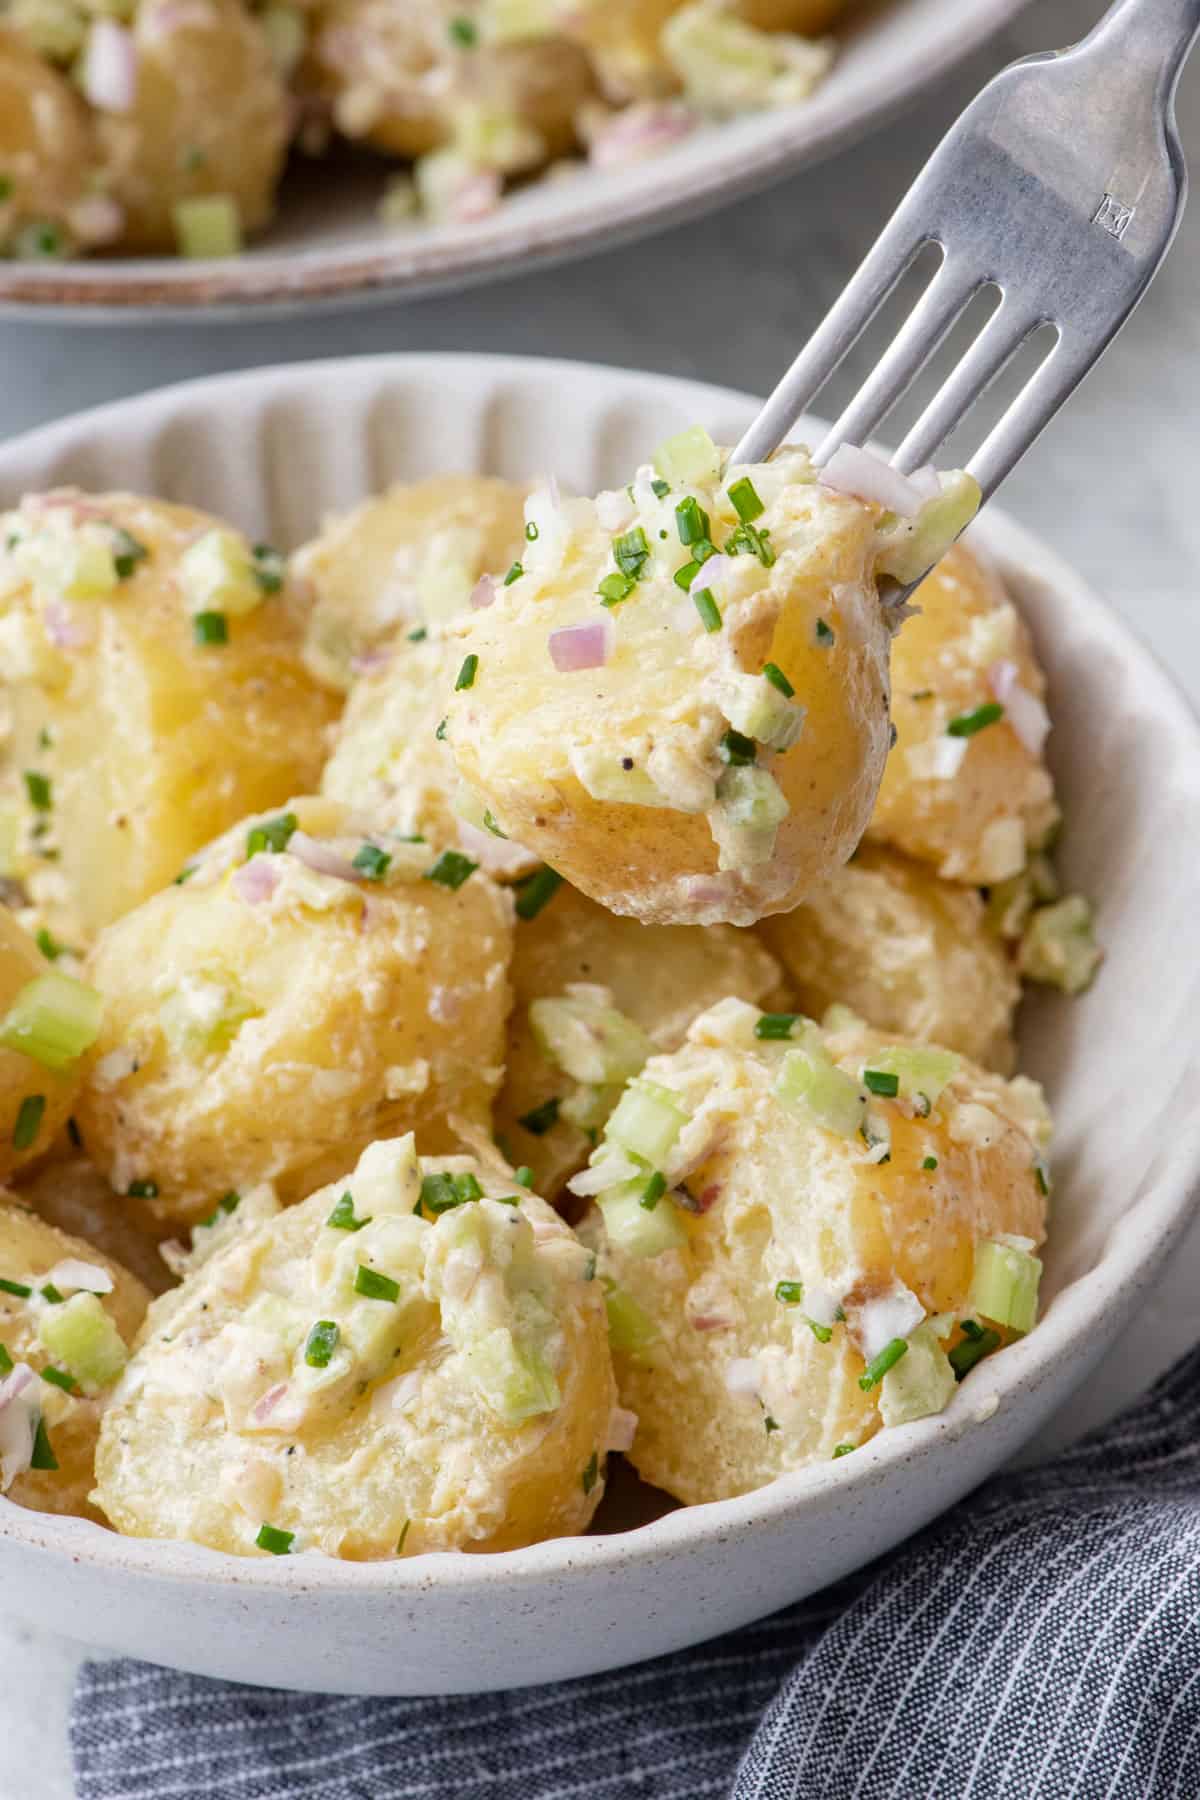 Potato salad in a bowl with a fork picking up a piece to show the light dressing and finely diced onions, celery, and chives.